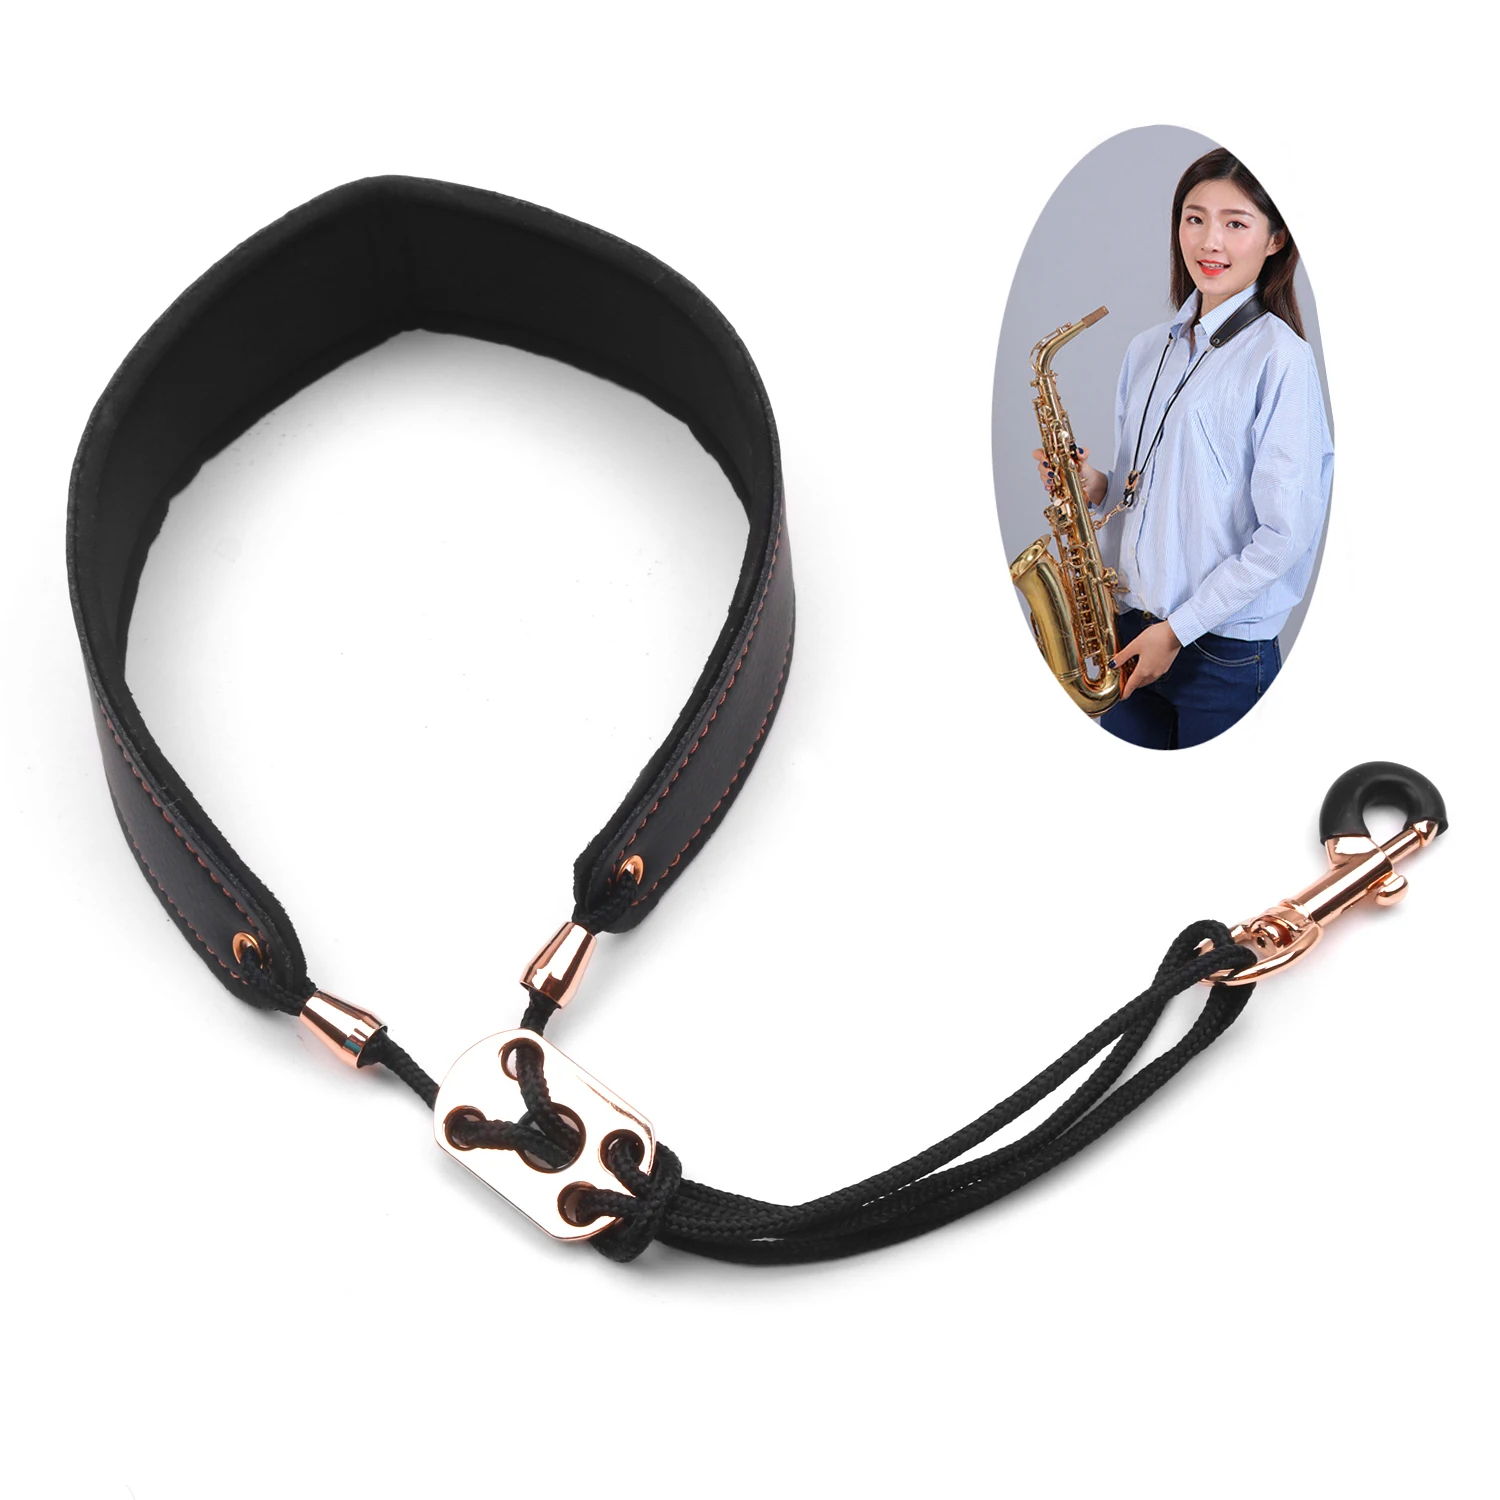 oboe adjustable saxophone neck strap suitable for soprano tenor saxophone Soft leather saxophone strap bassoon saxophone leather strap clarinet 16-22 inches metal hook